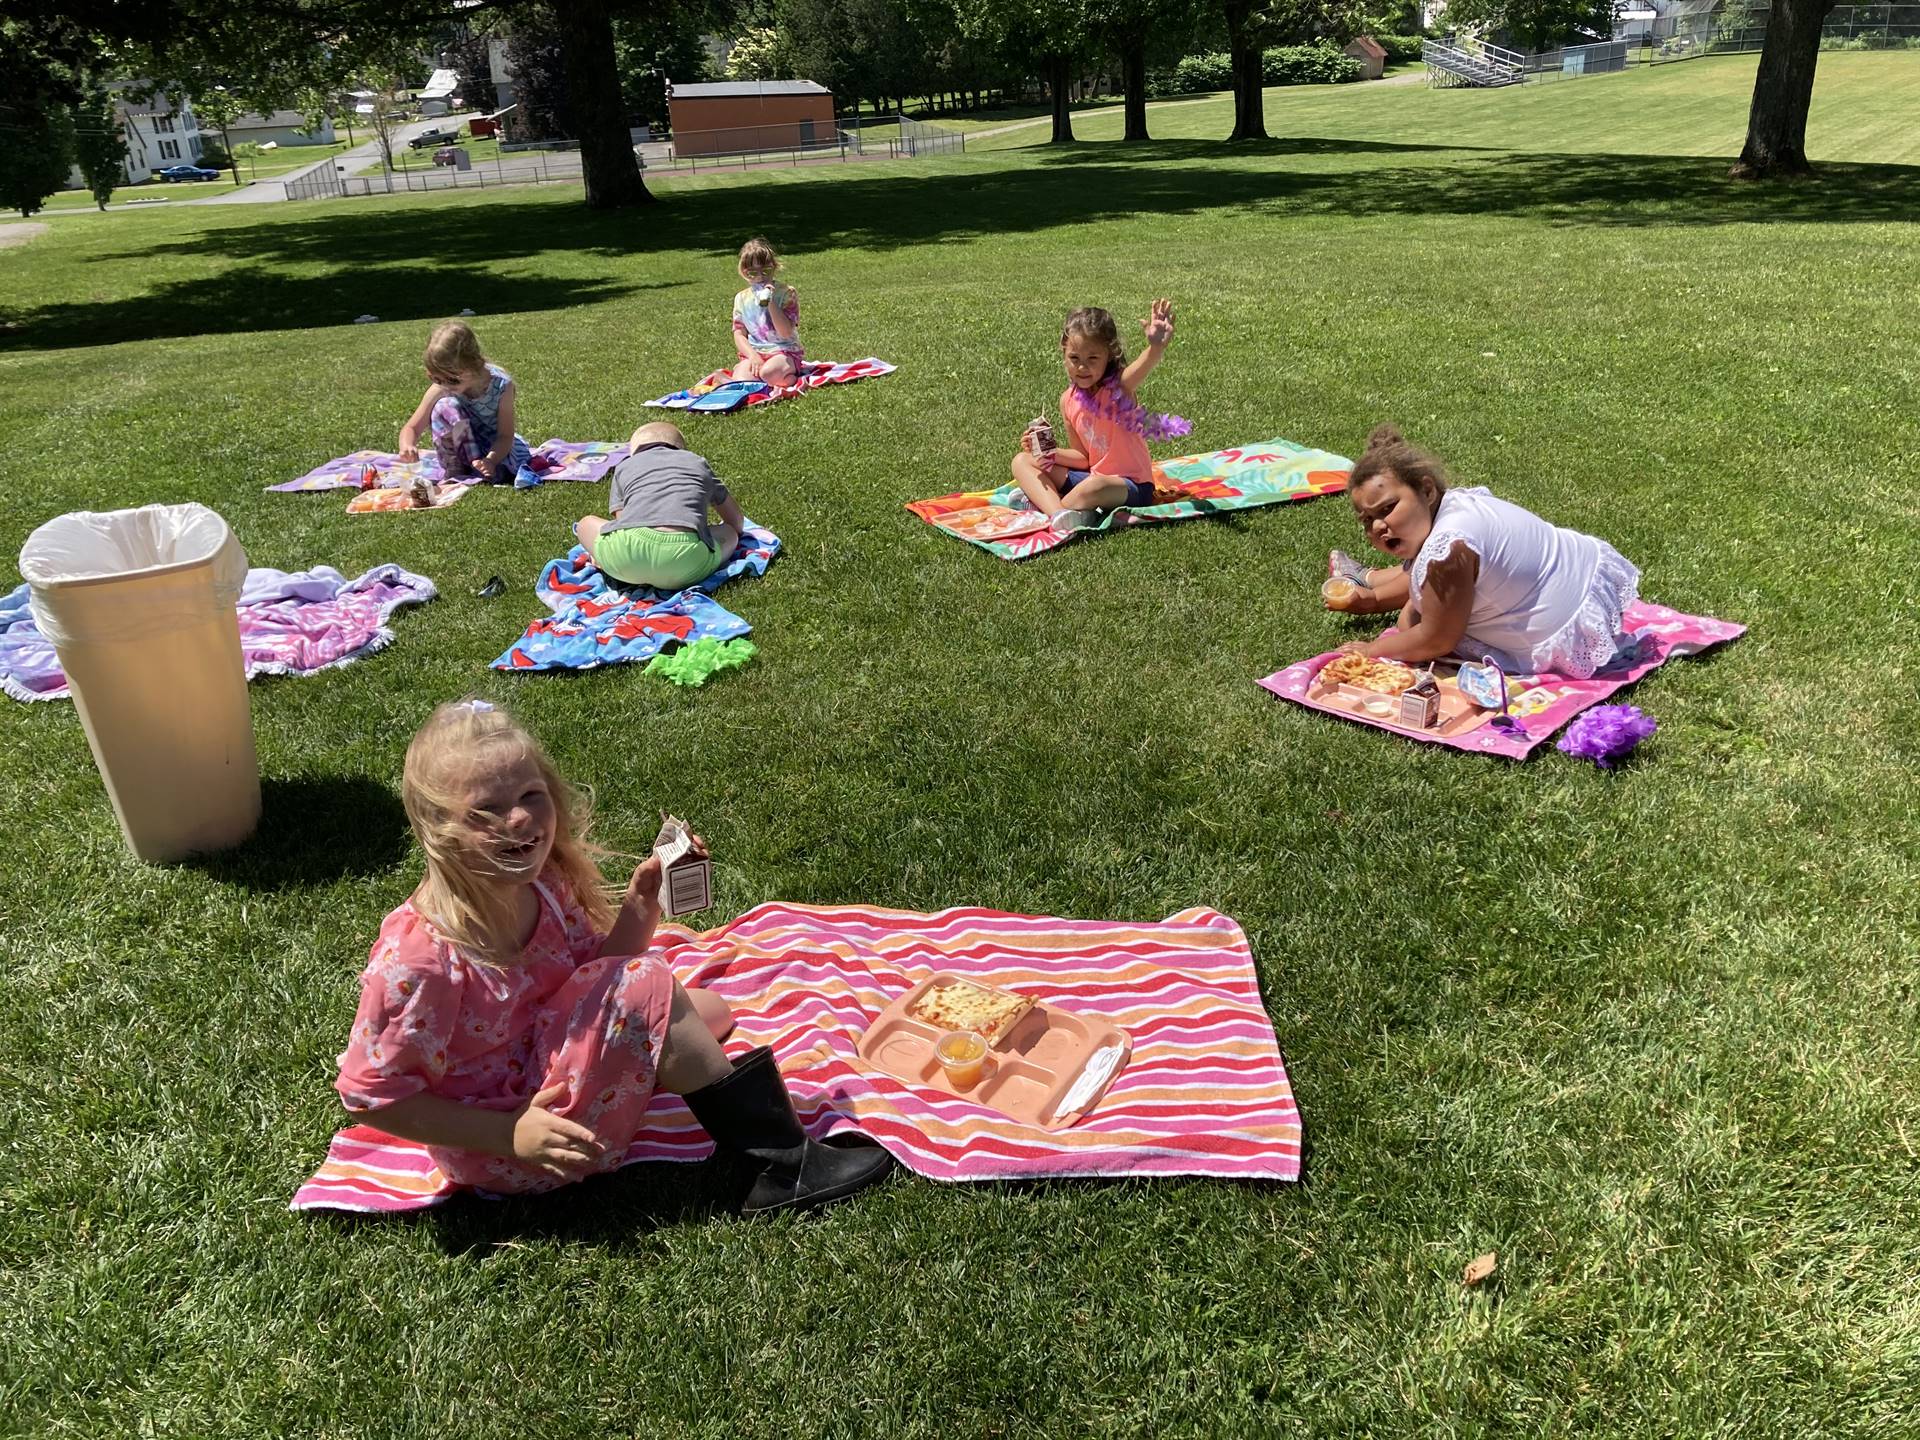  students on a beach towels outside eating.